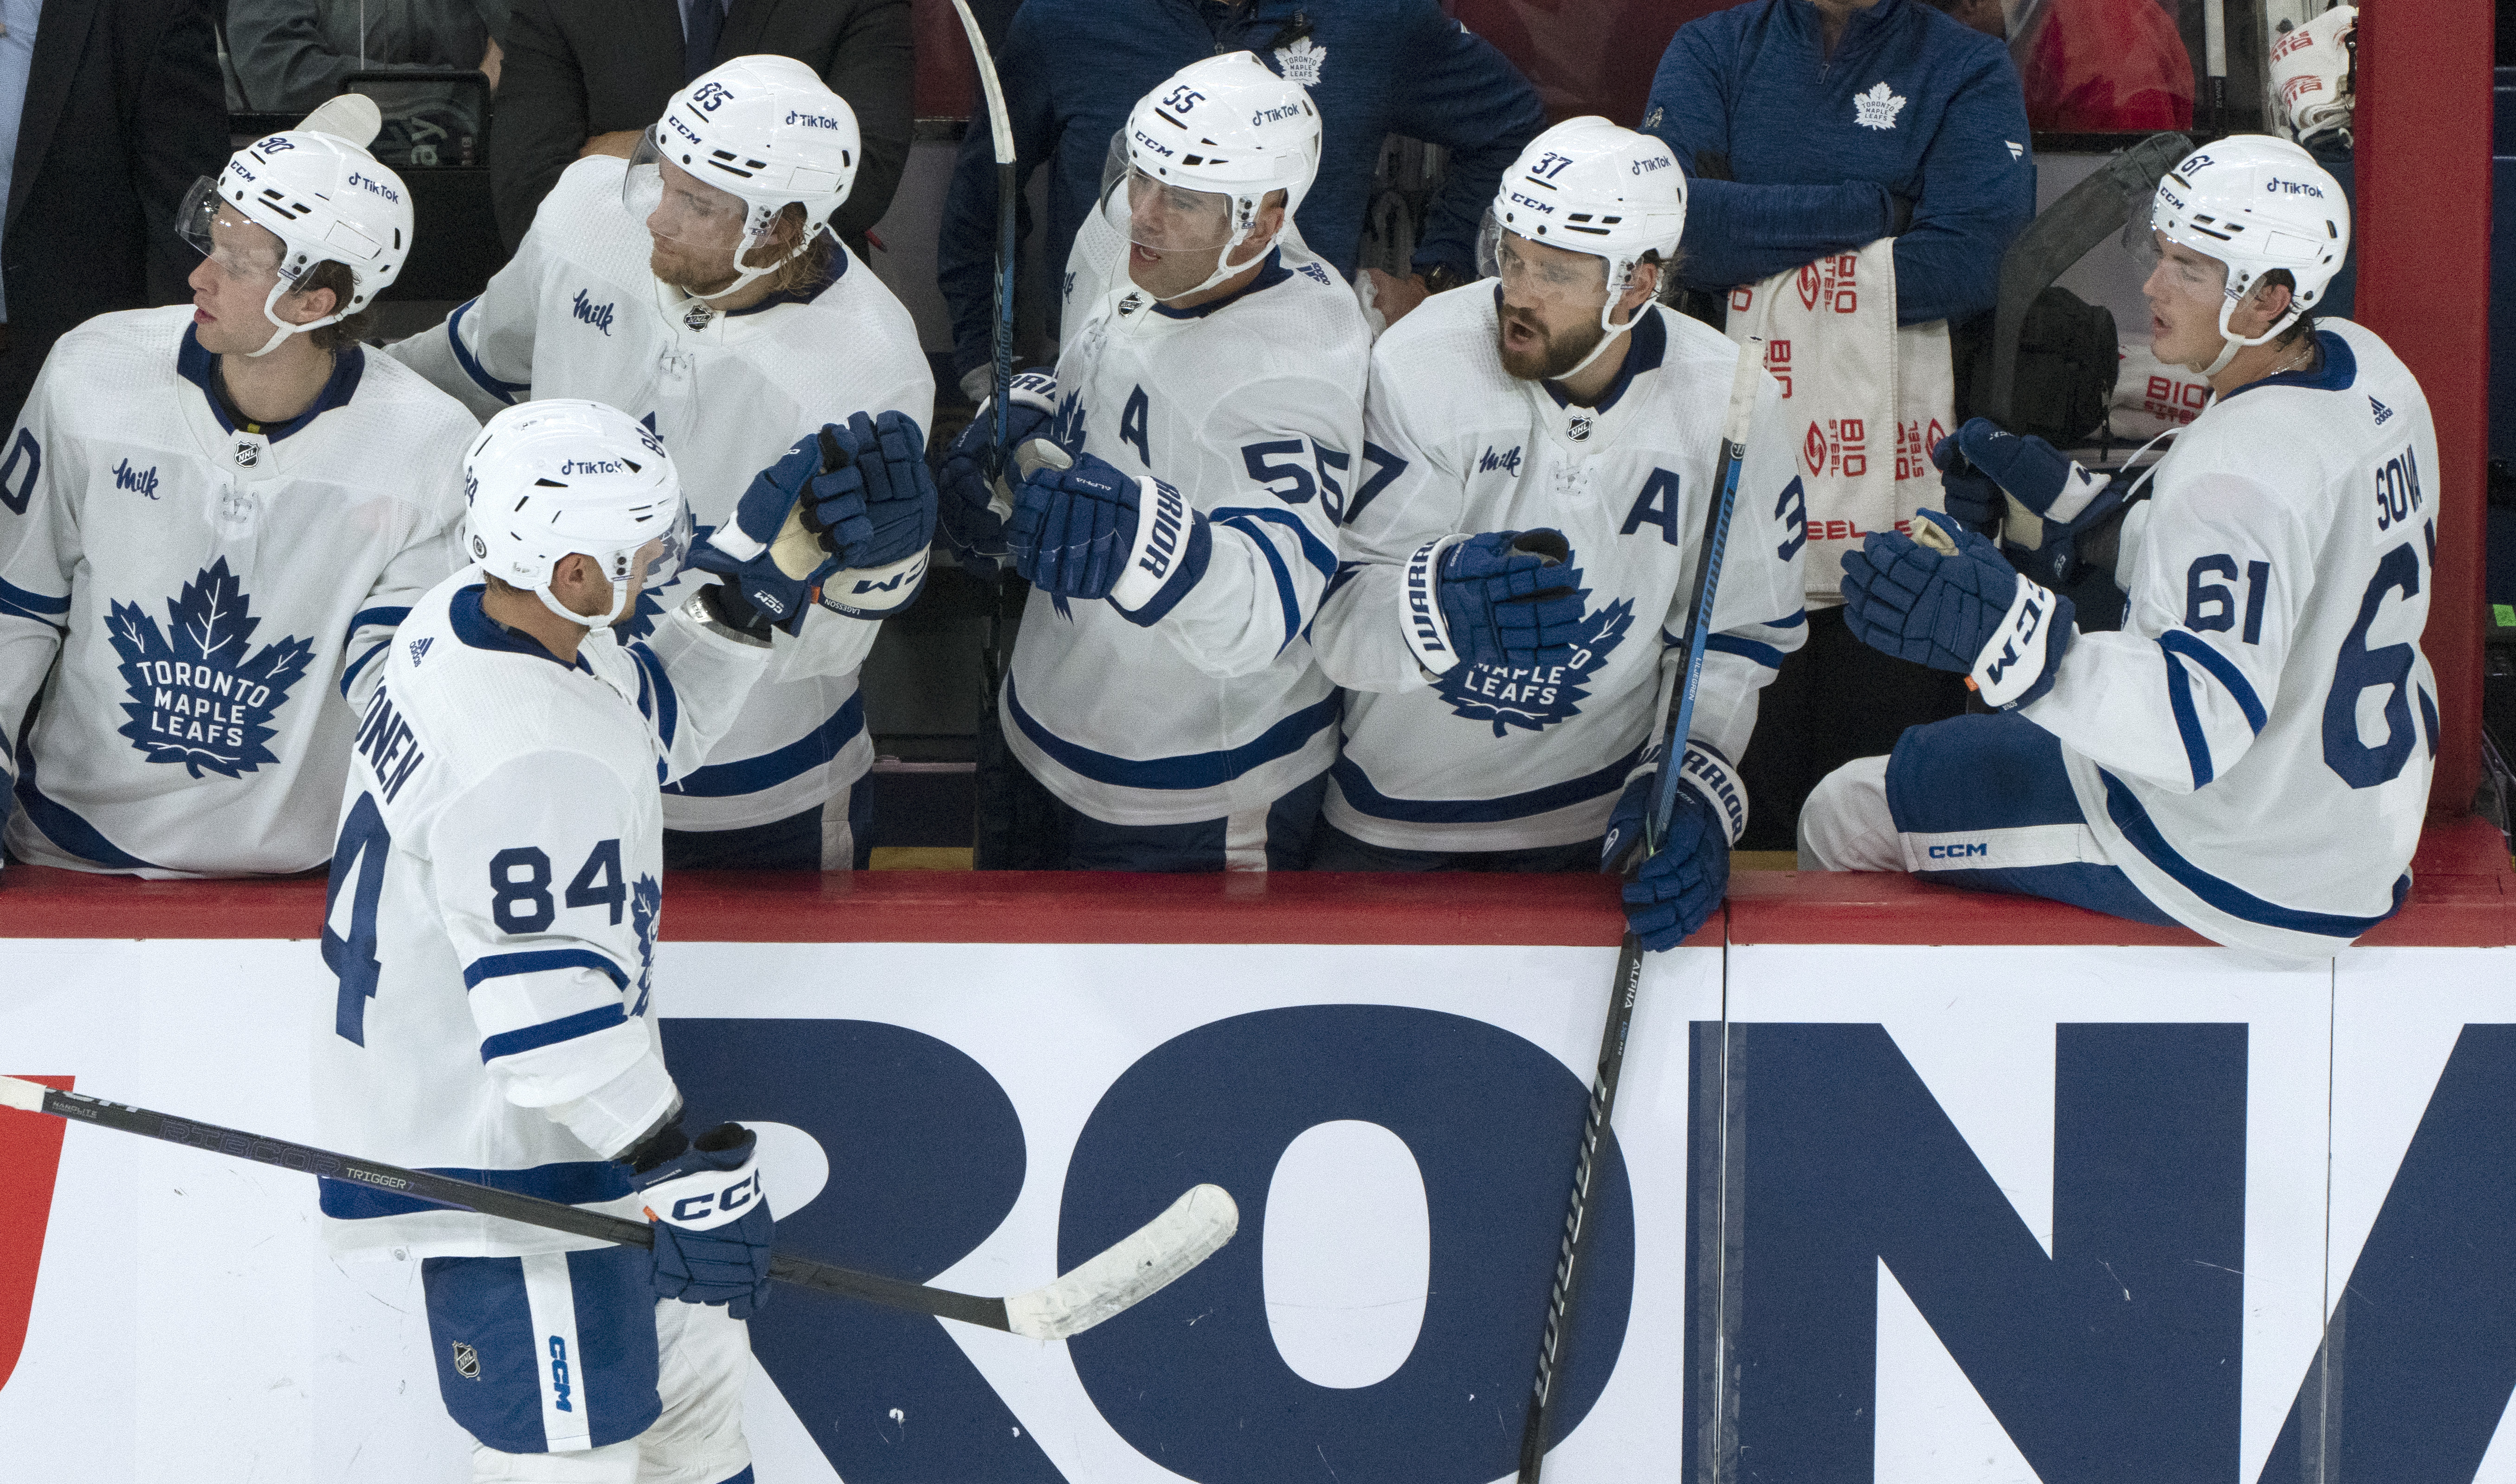 Matthew Knies scores short-handed goal as Maple Leafs edge Canadiens 2-1